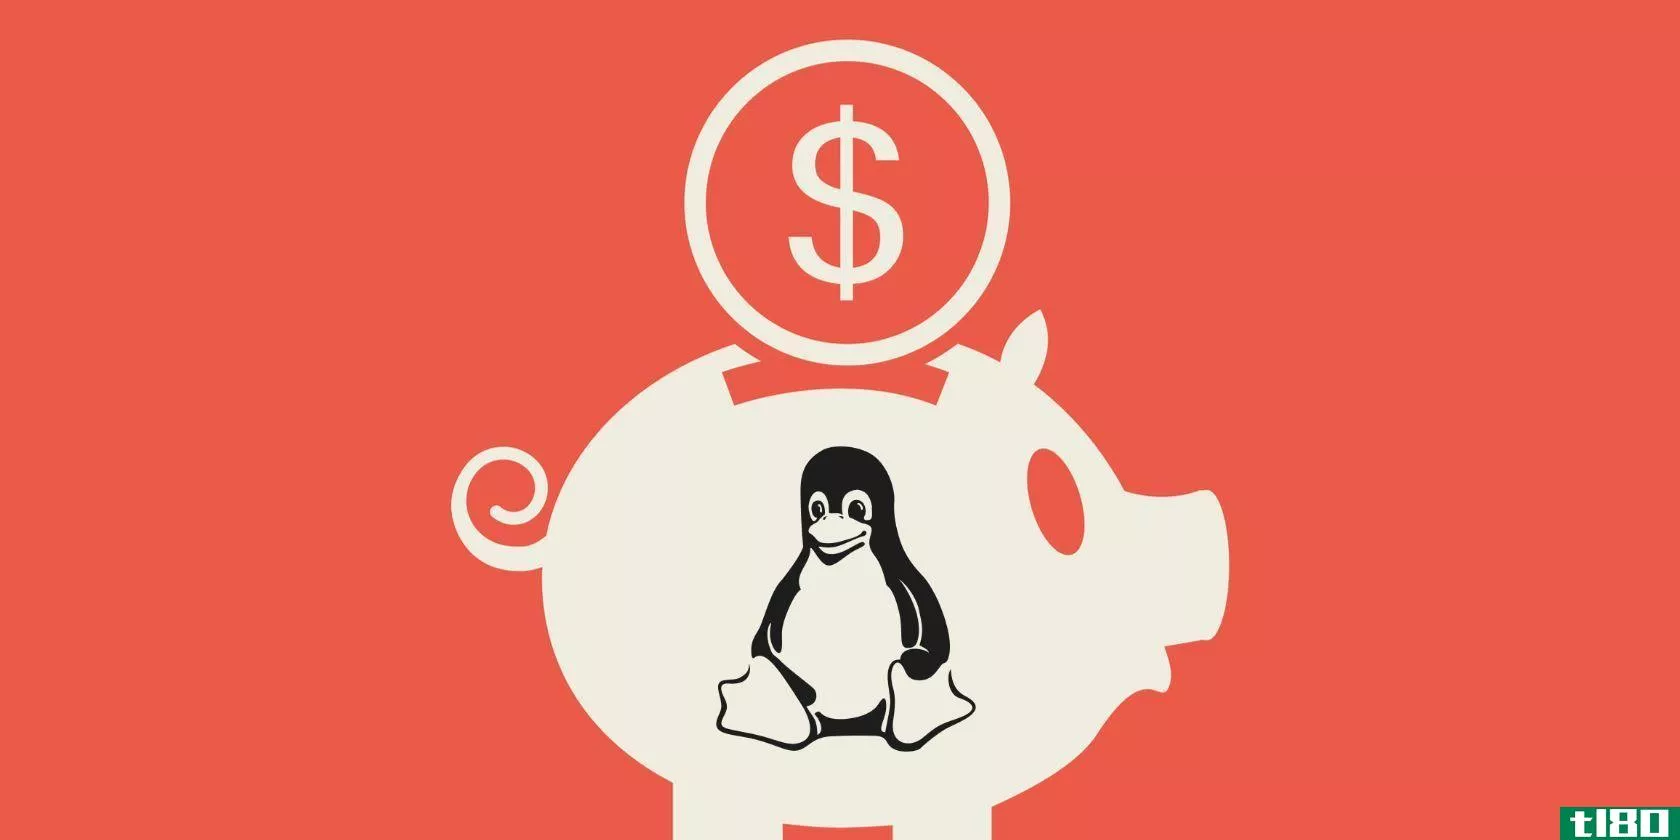 save-money-linux-featured